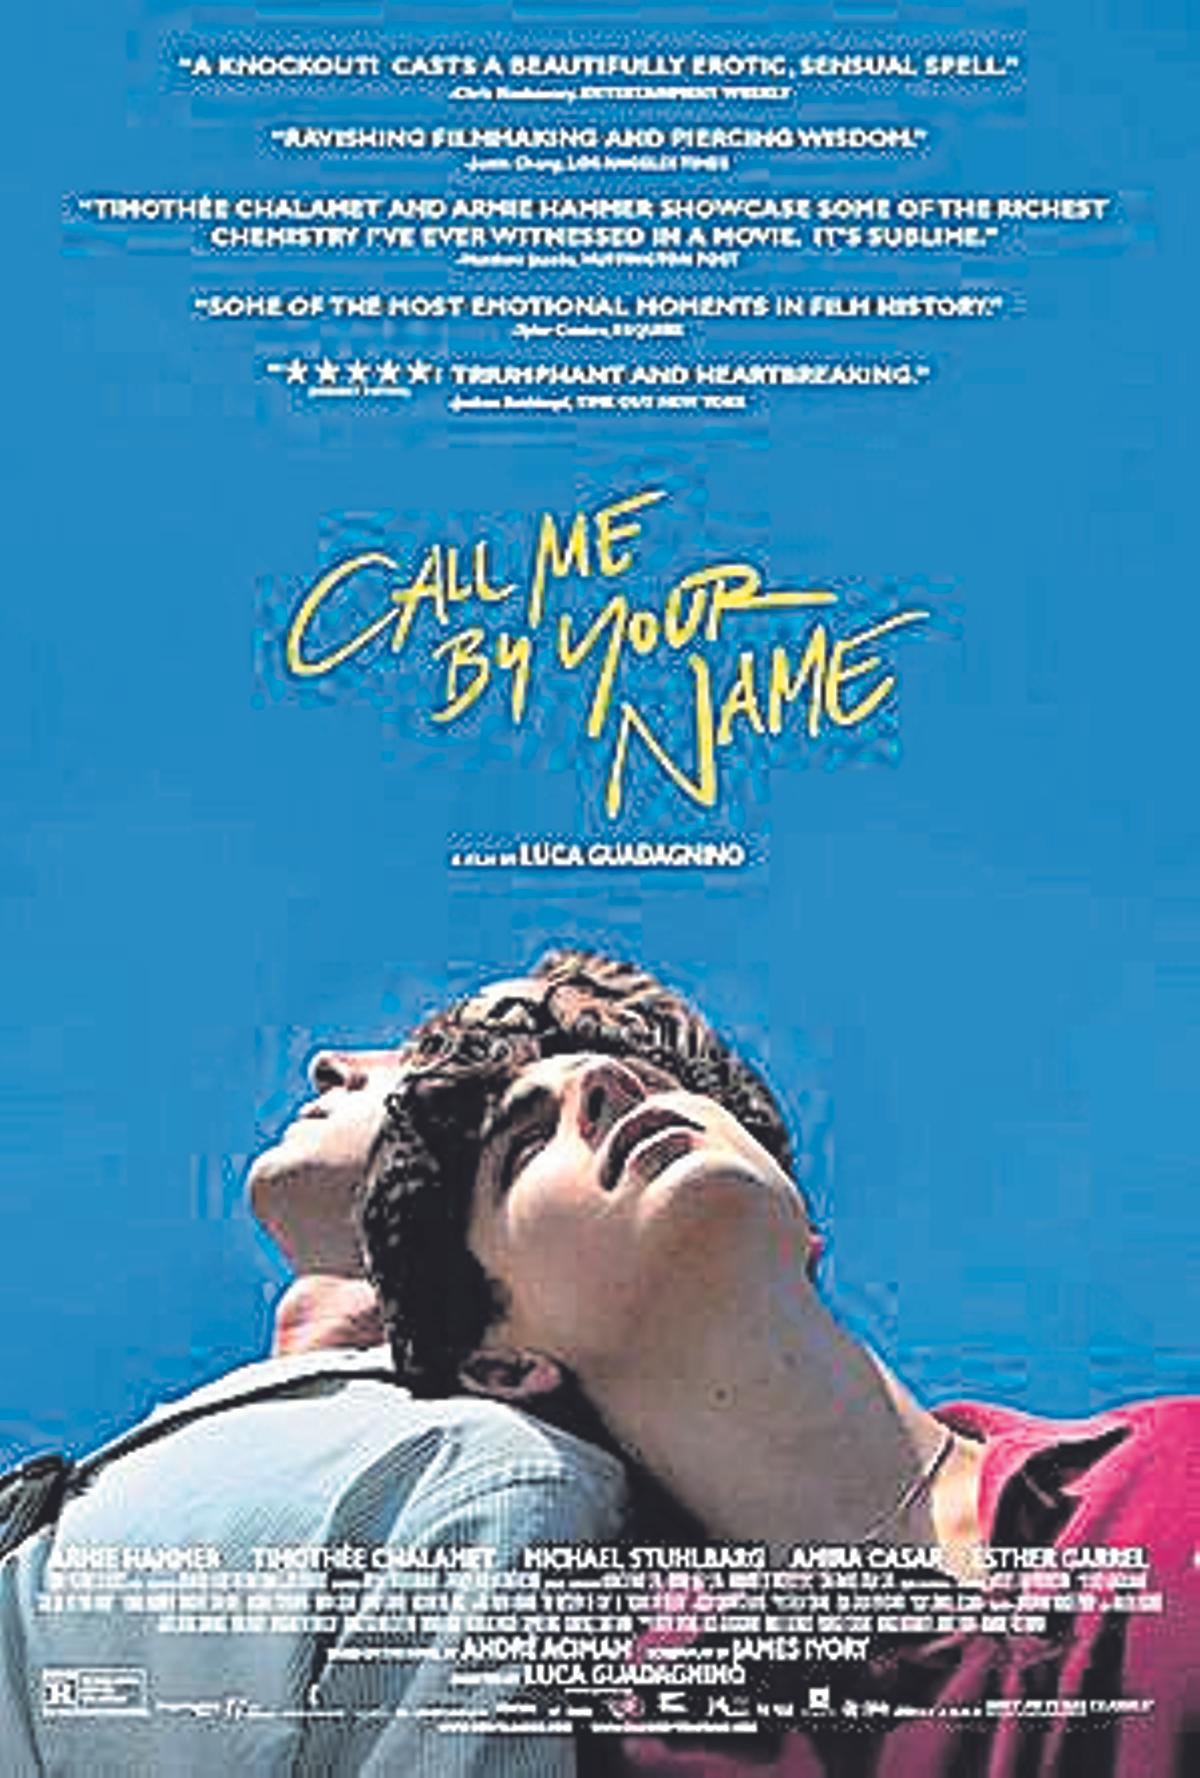 Call me by your name.